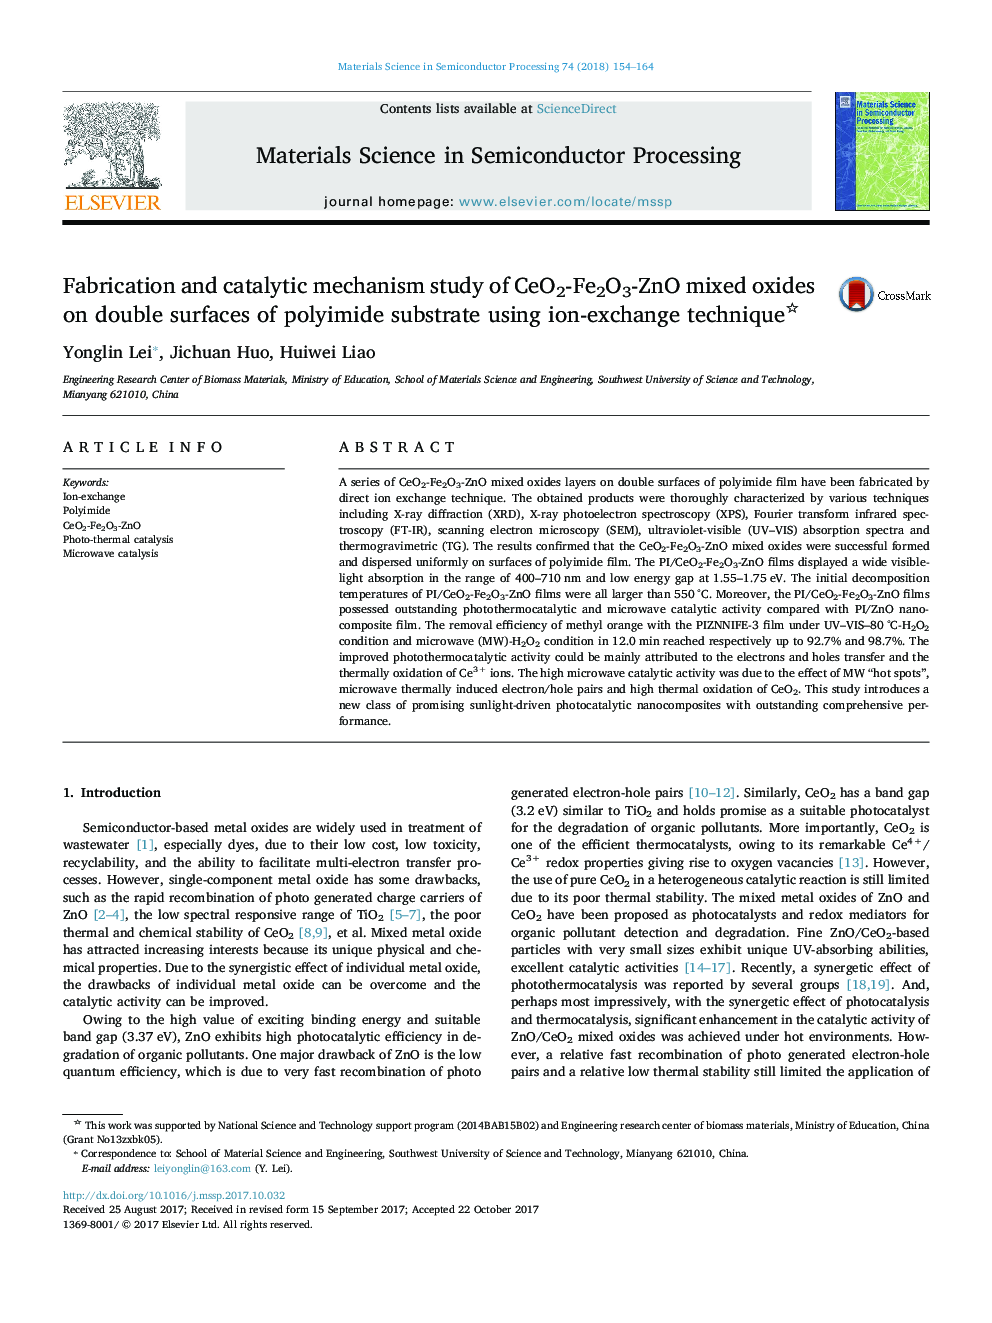 Fabrication and catalytic mechanism study of CeO2-Fe2O3-ZnO mixed oxides on double surfaces of polyimide substrate using ion-exchange technique